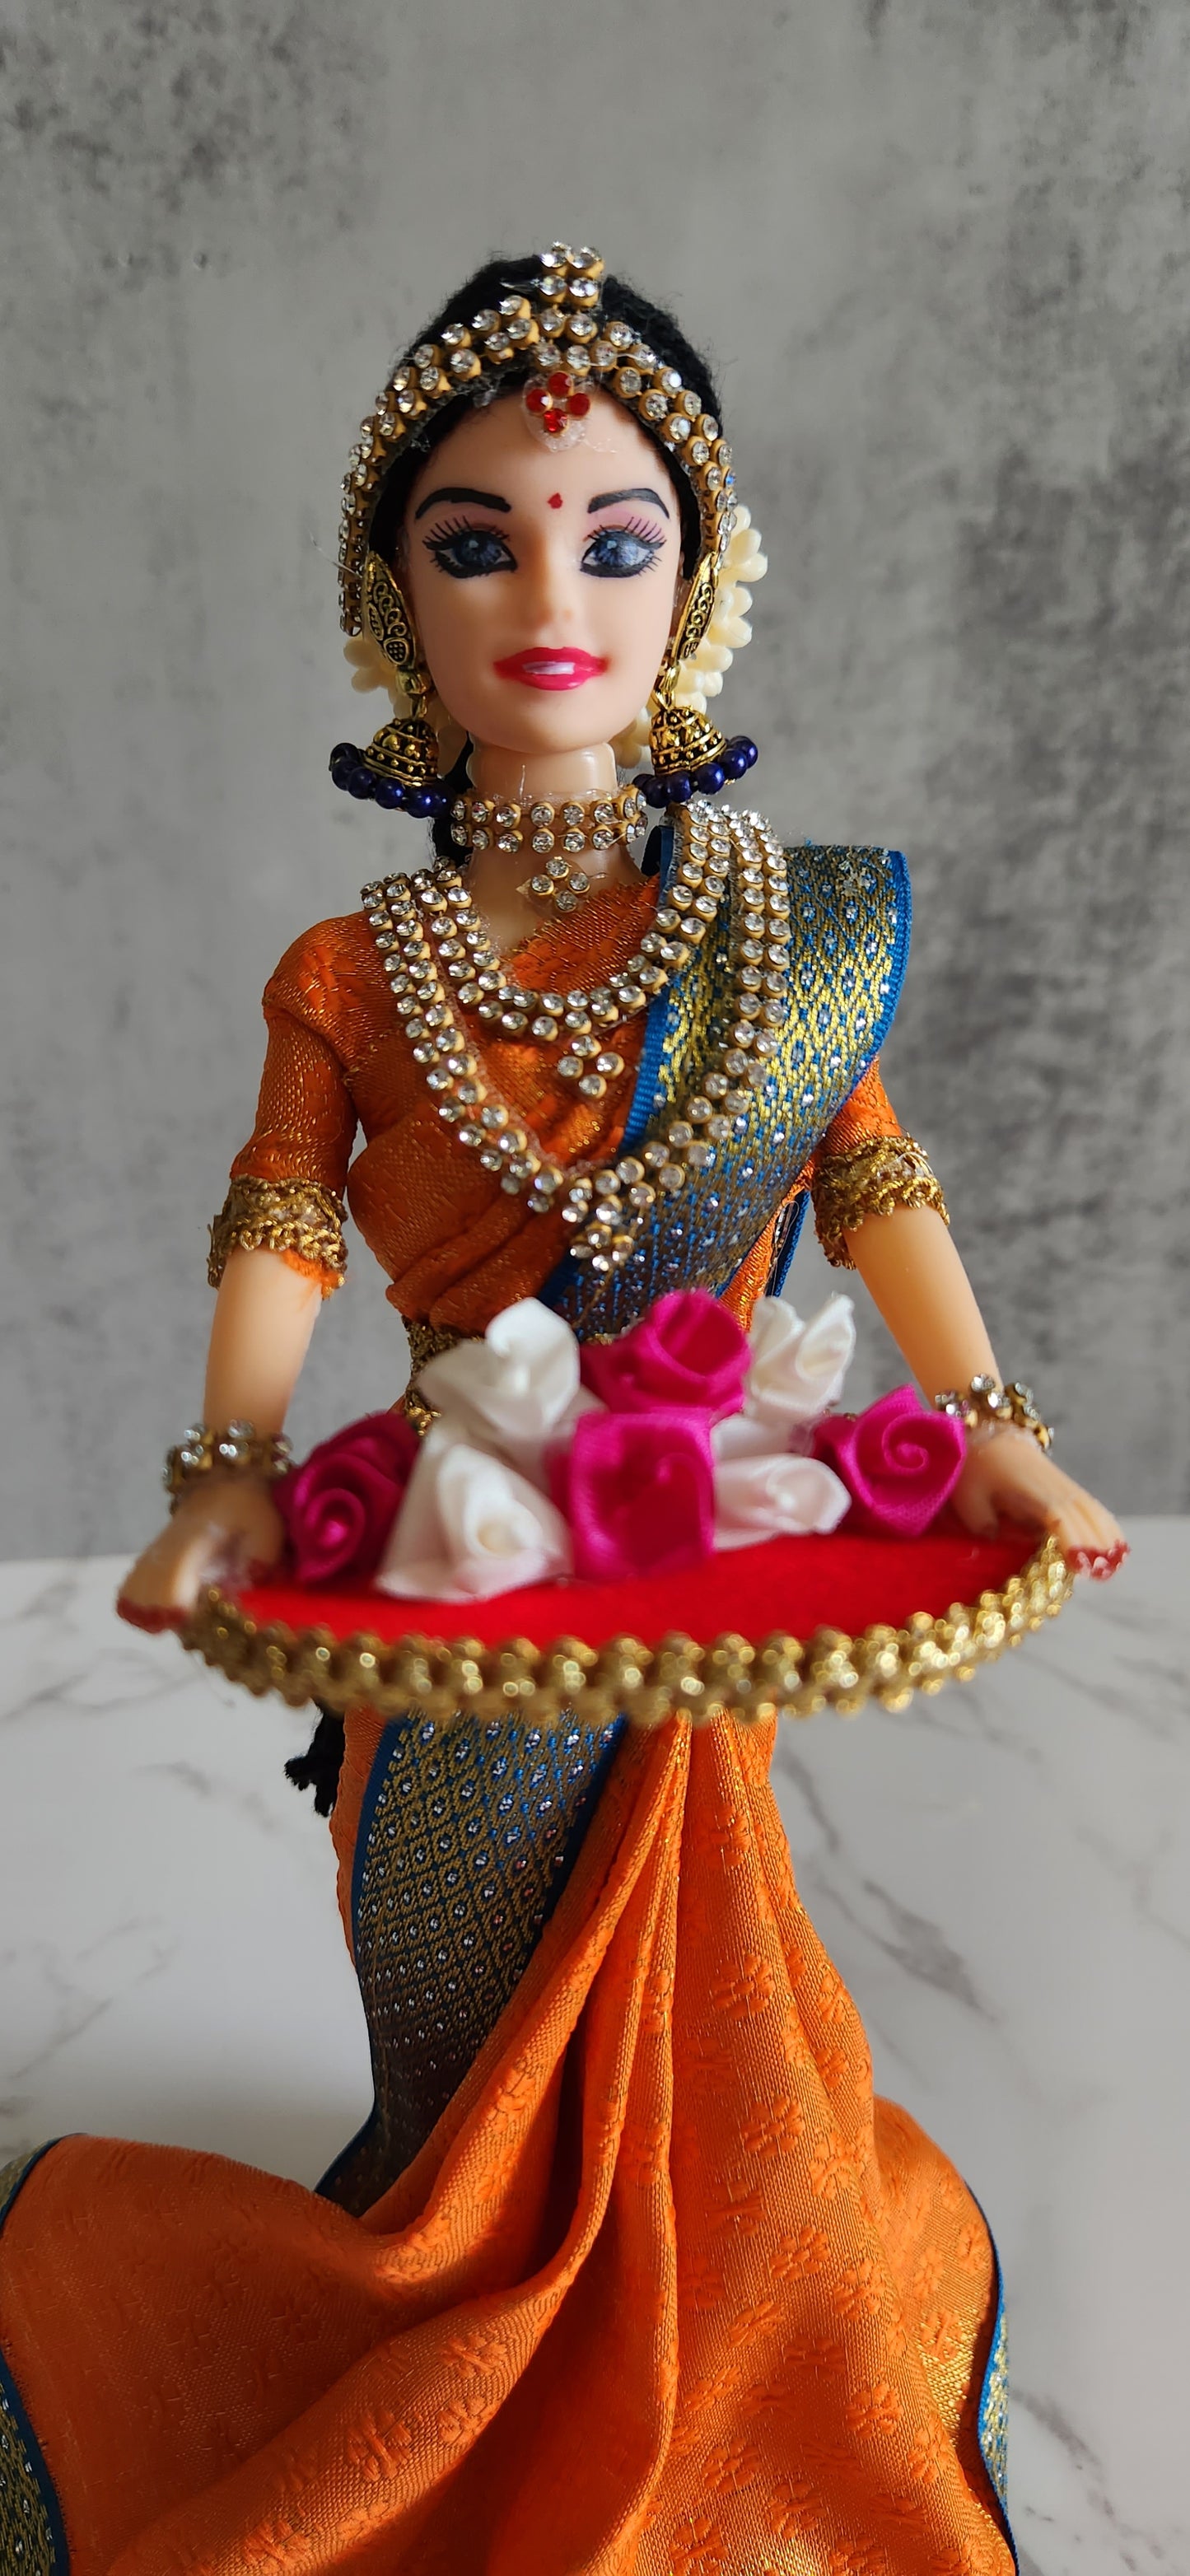 Indian Ethnic Doll holding Flowers Tray